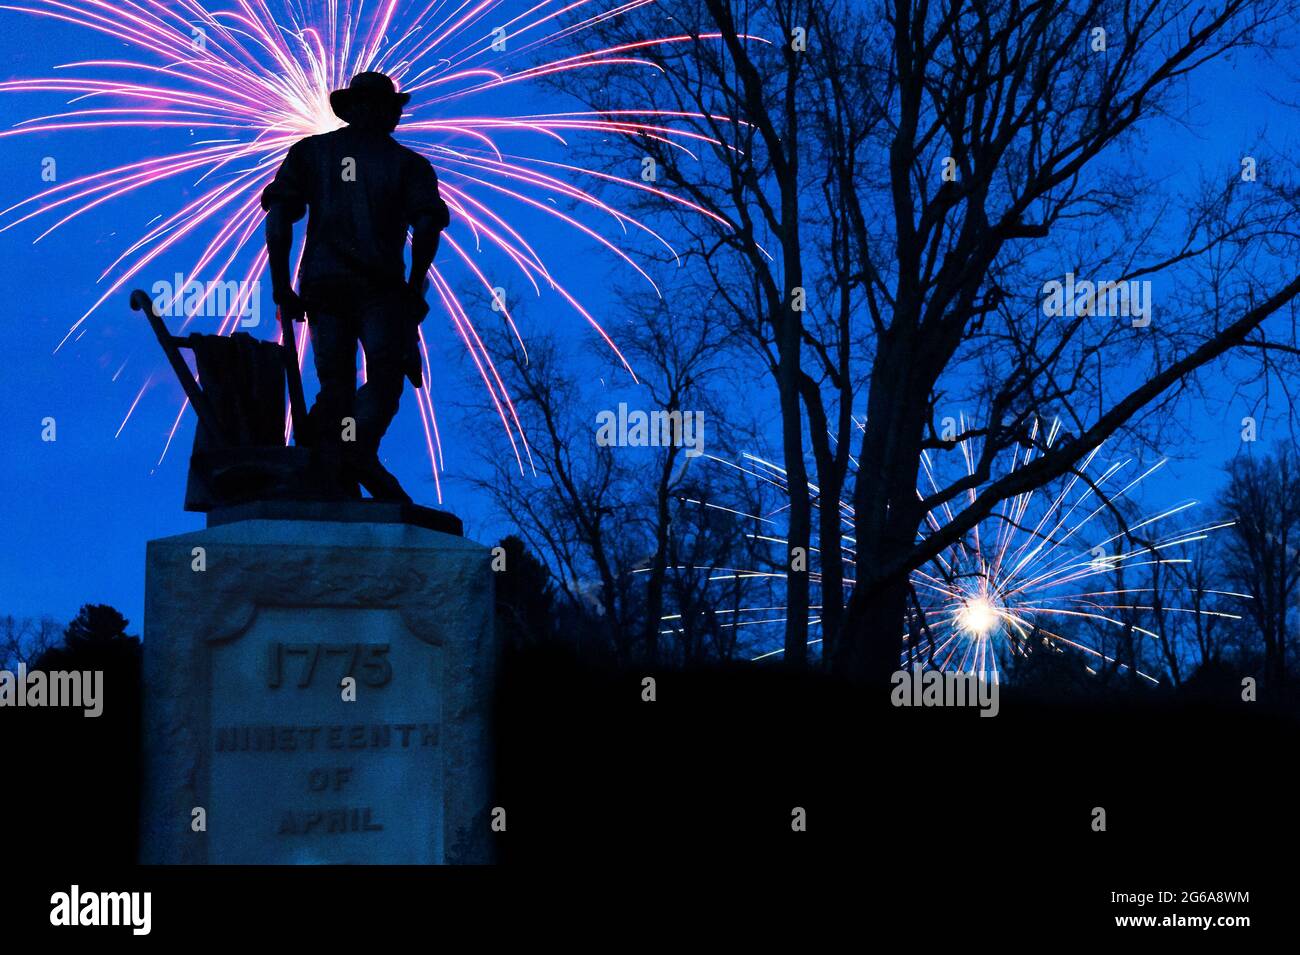 Fireworks going off behind Minuteman statue at the Old North Bridge, in Concord, Massachusetts (photoshop). Stock Photo